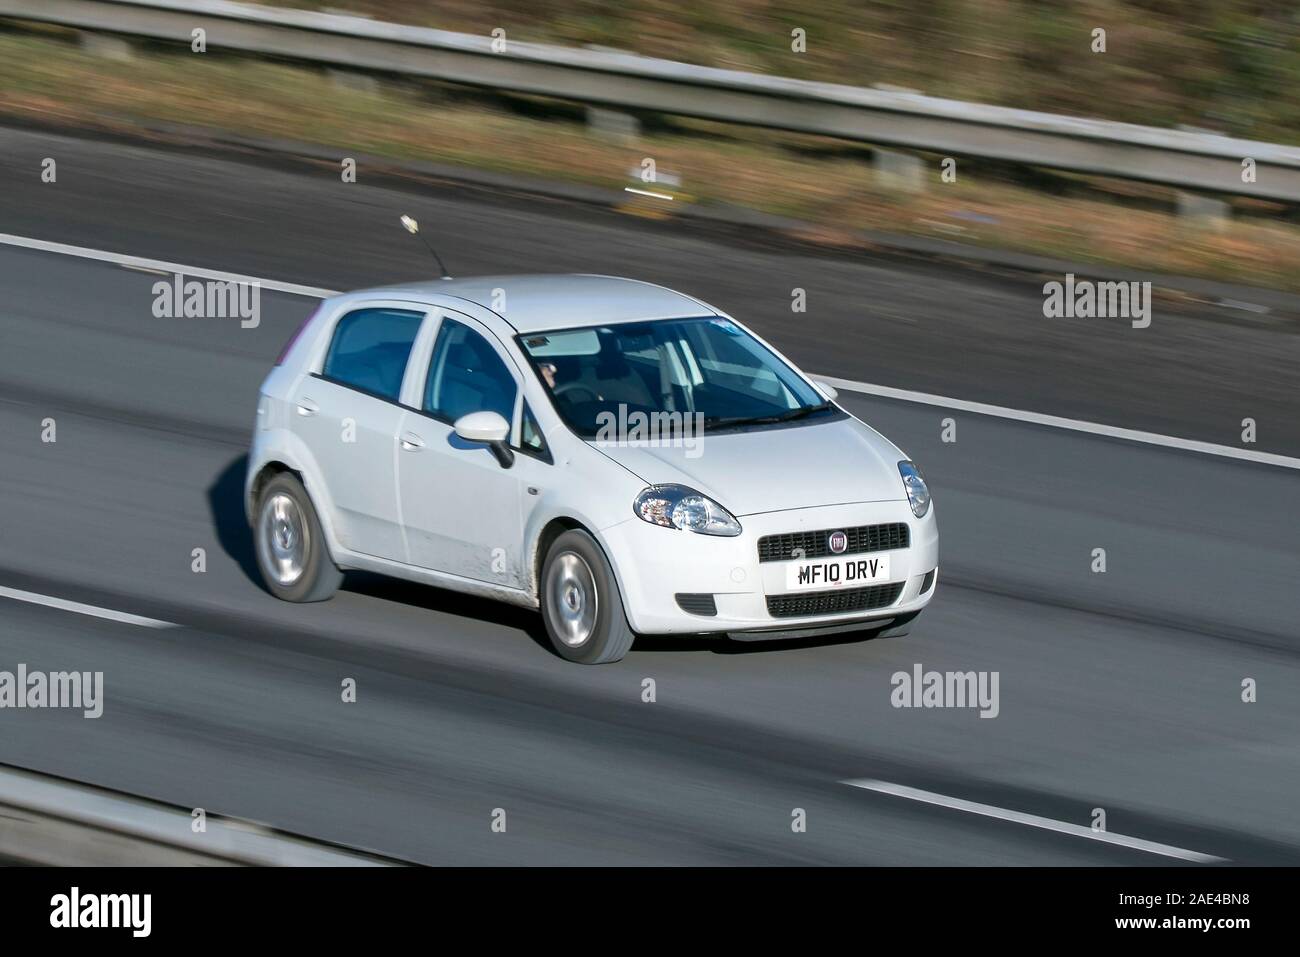 Blurred moving car FIAT Grande Punto Sound traveling at speed on the M61 motorway Slow camera shutter speed vehicle movement Stock Photo